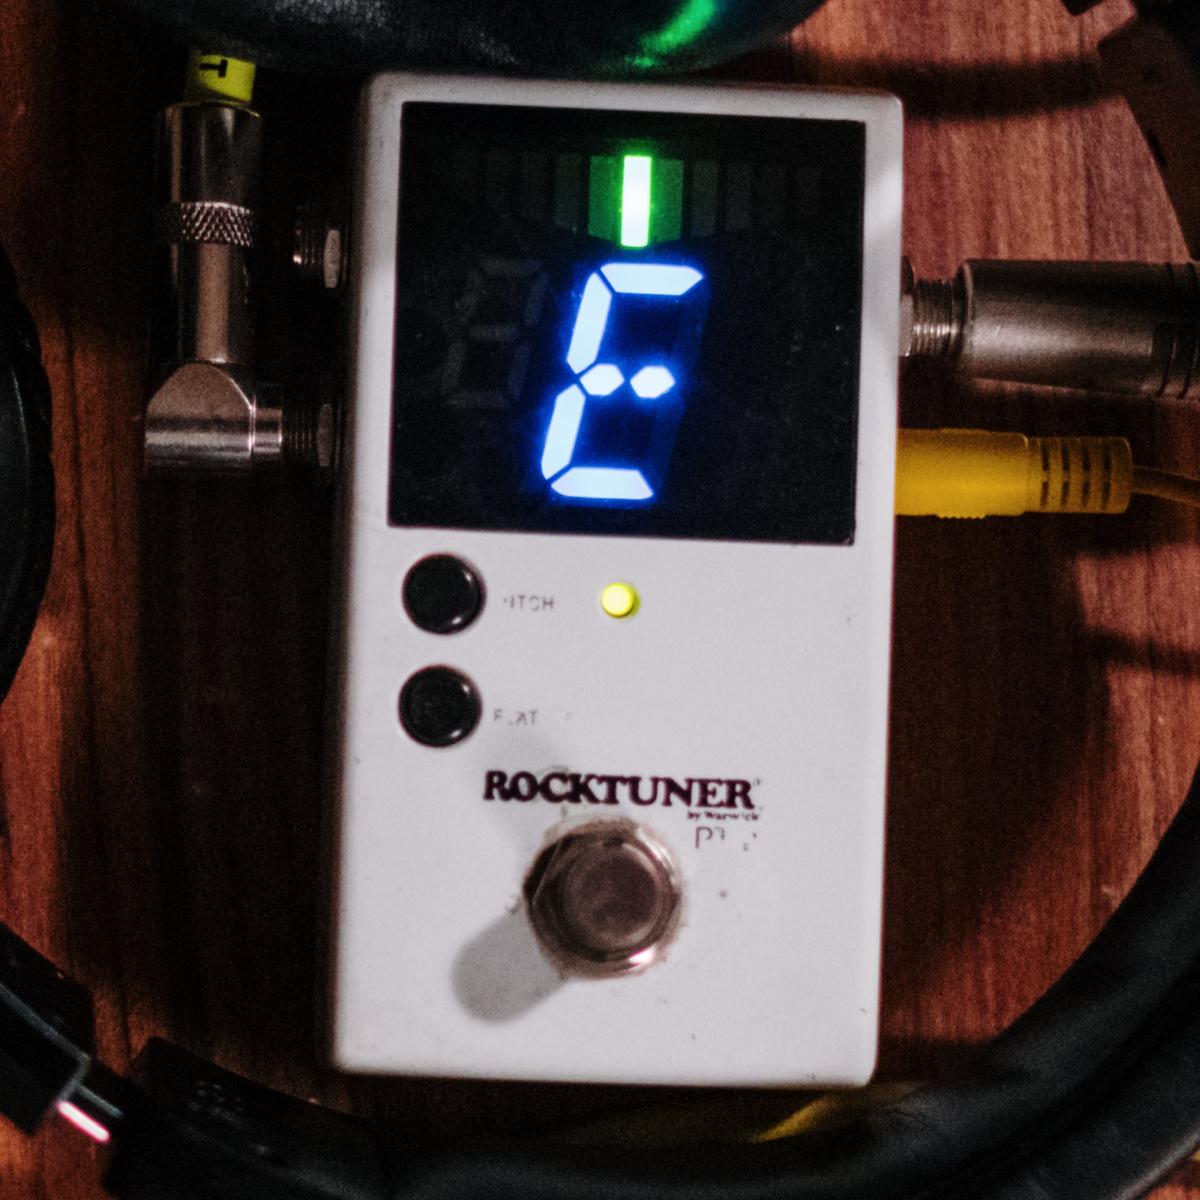 Electronic guitar tuner showing the note "E".